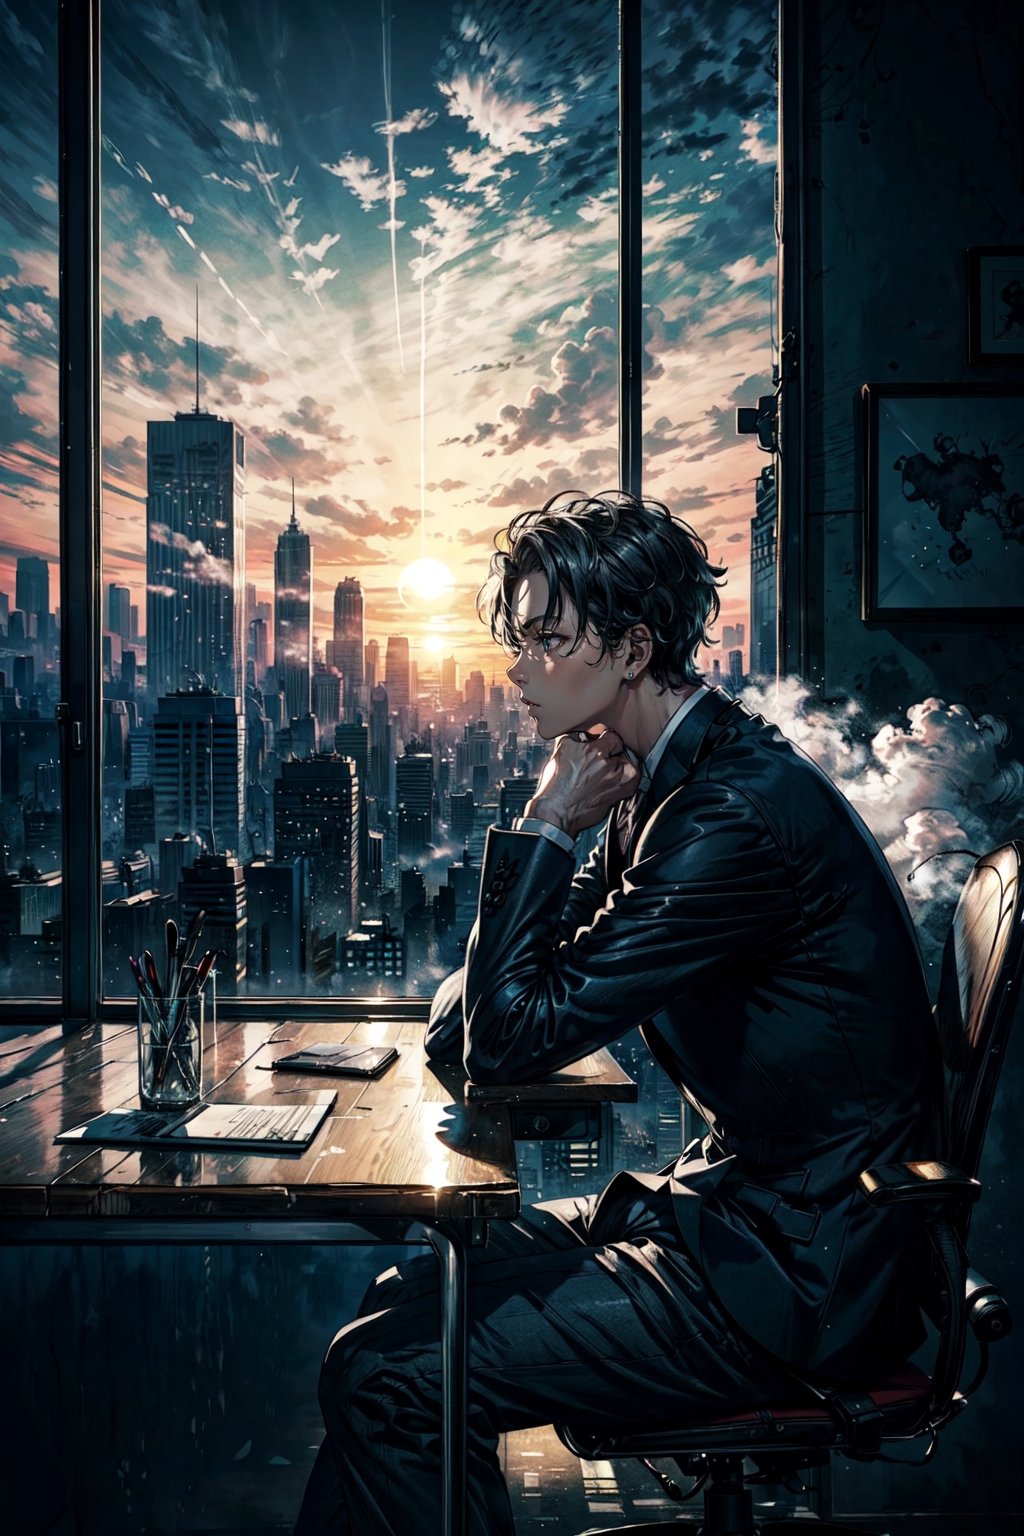 man, manager sitting at a desk, hands on the table, suit, serious, office, skyscraper, window with view of clouds and the sky with sun, artwork, wallpaper